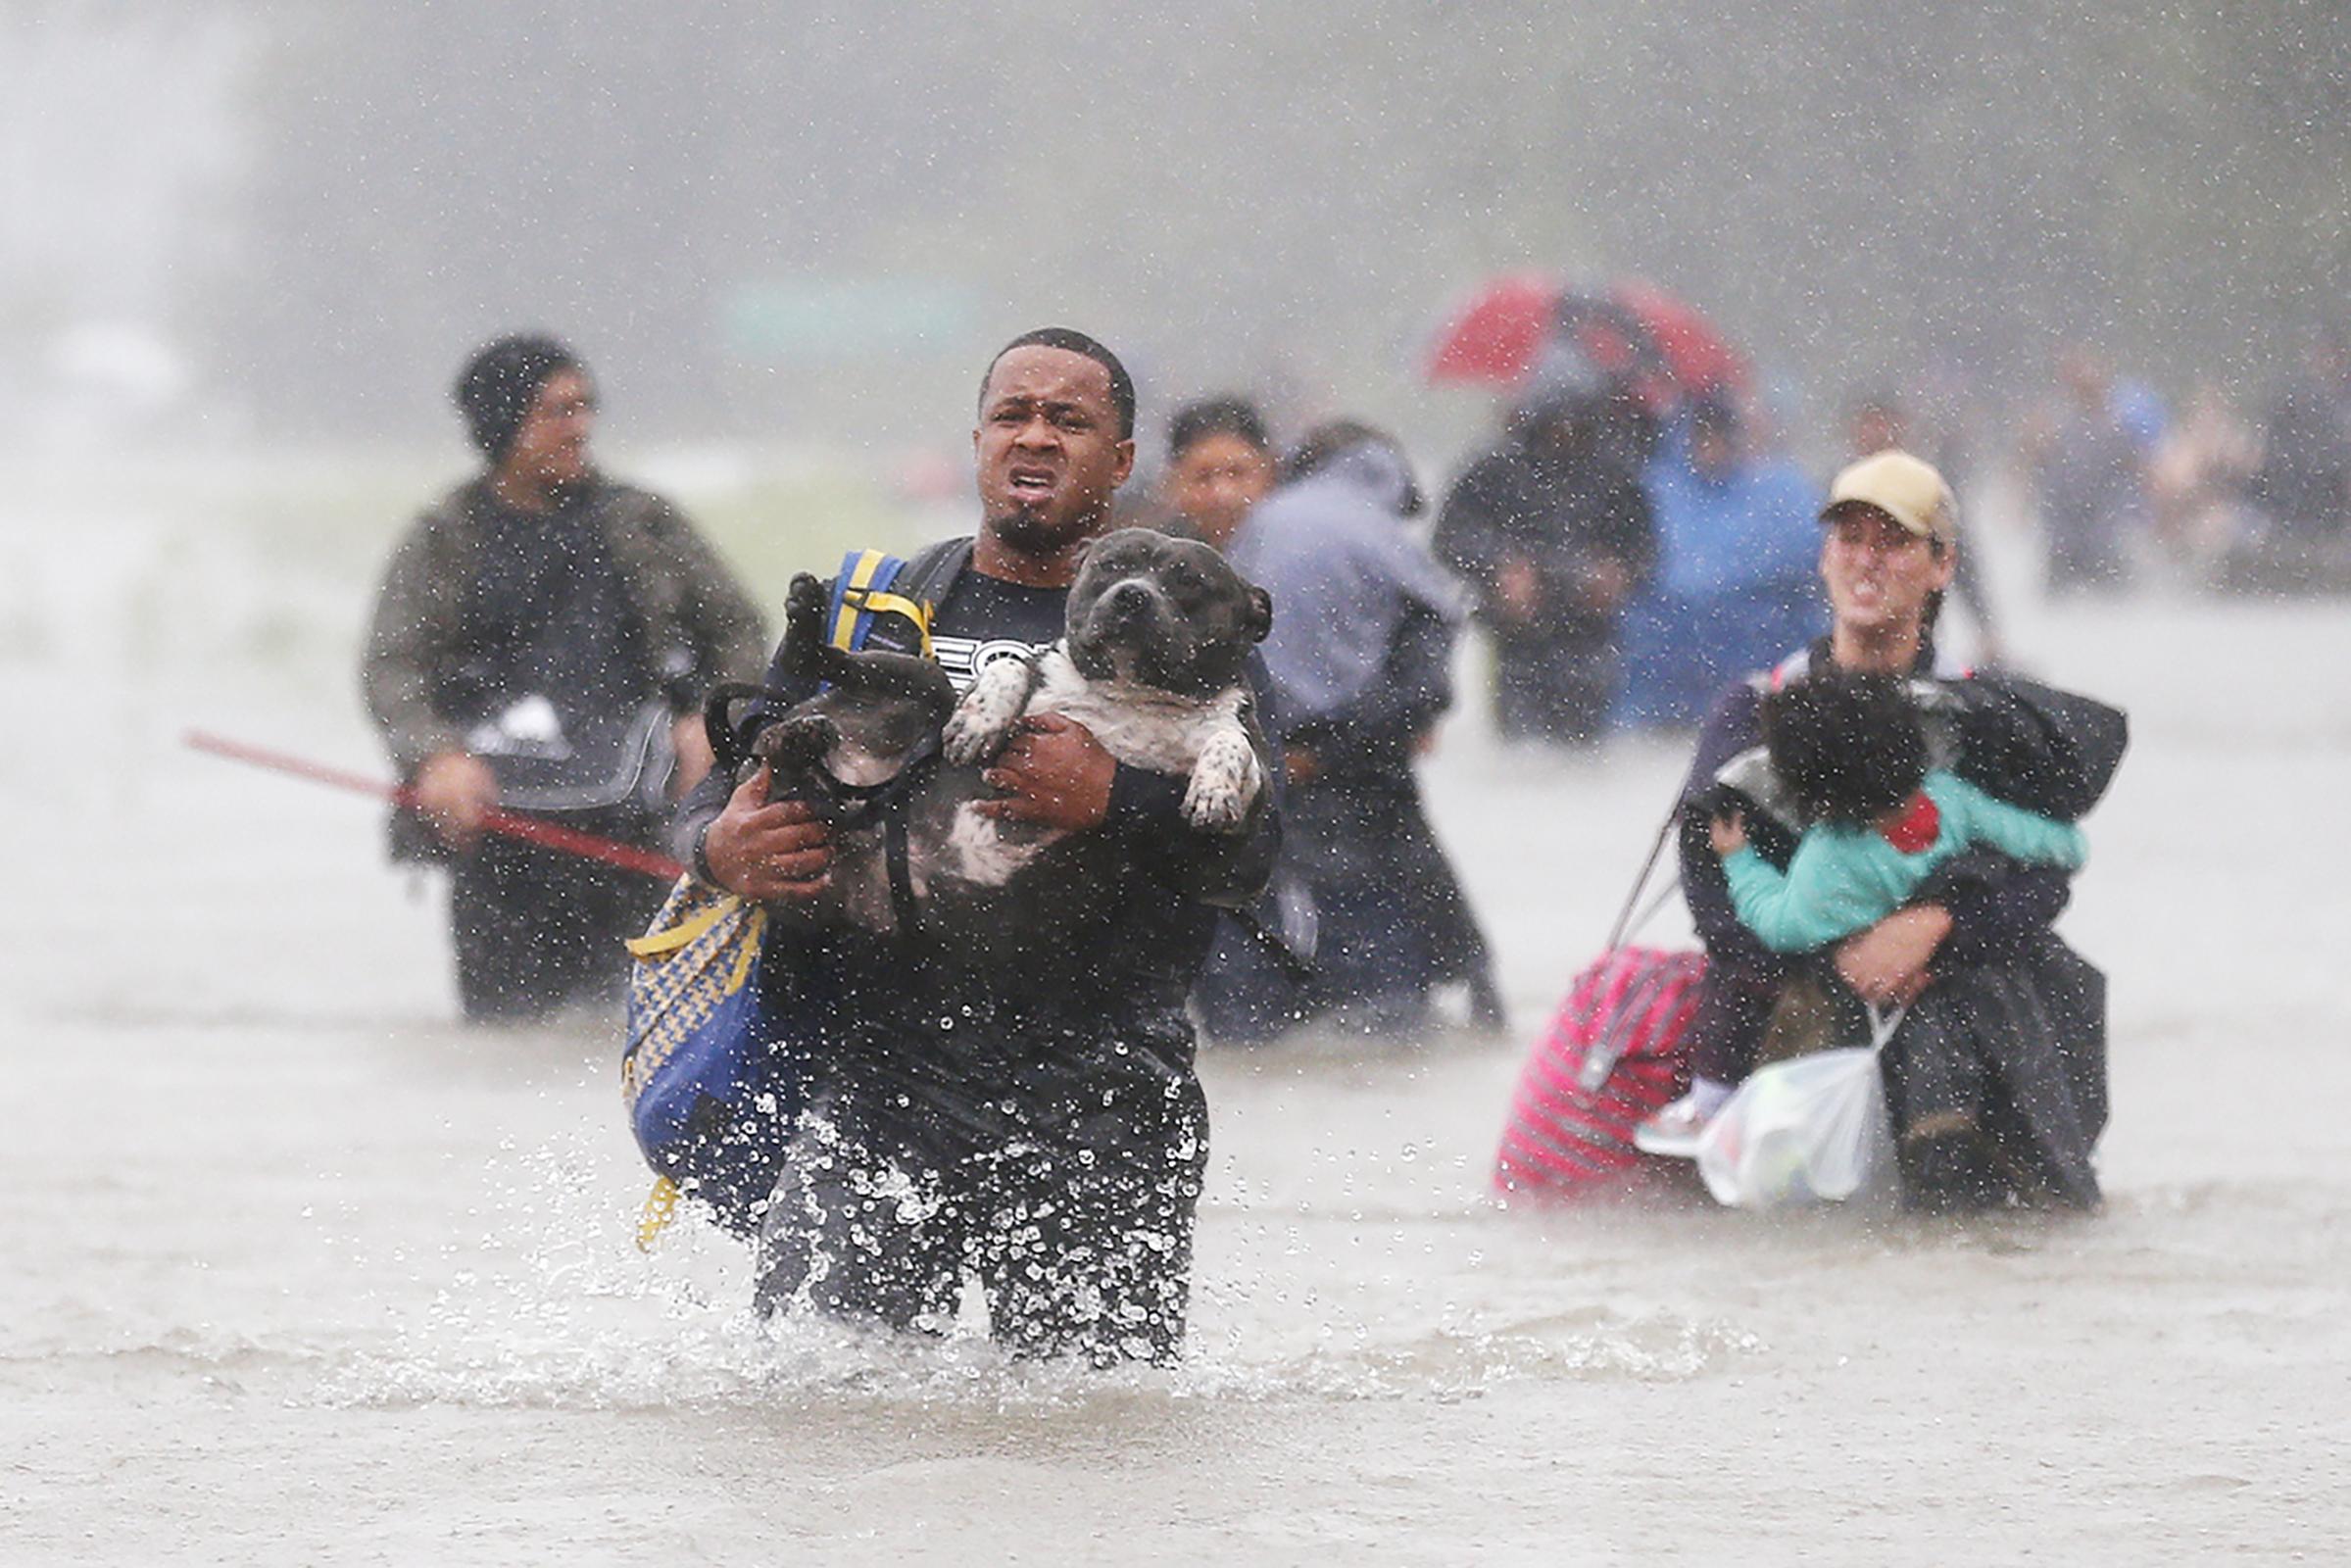 Courtney carries his dog through floodwaters in this news photograph that sparked an outpouring of support